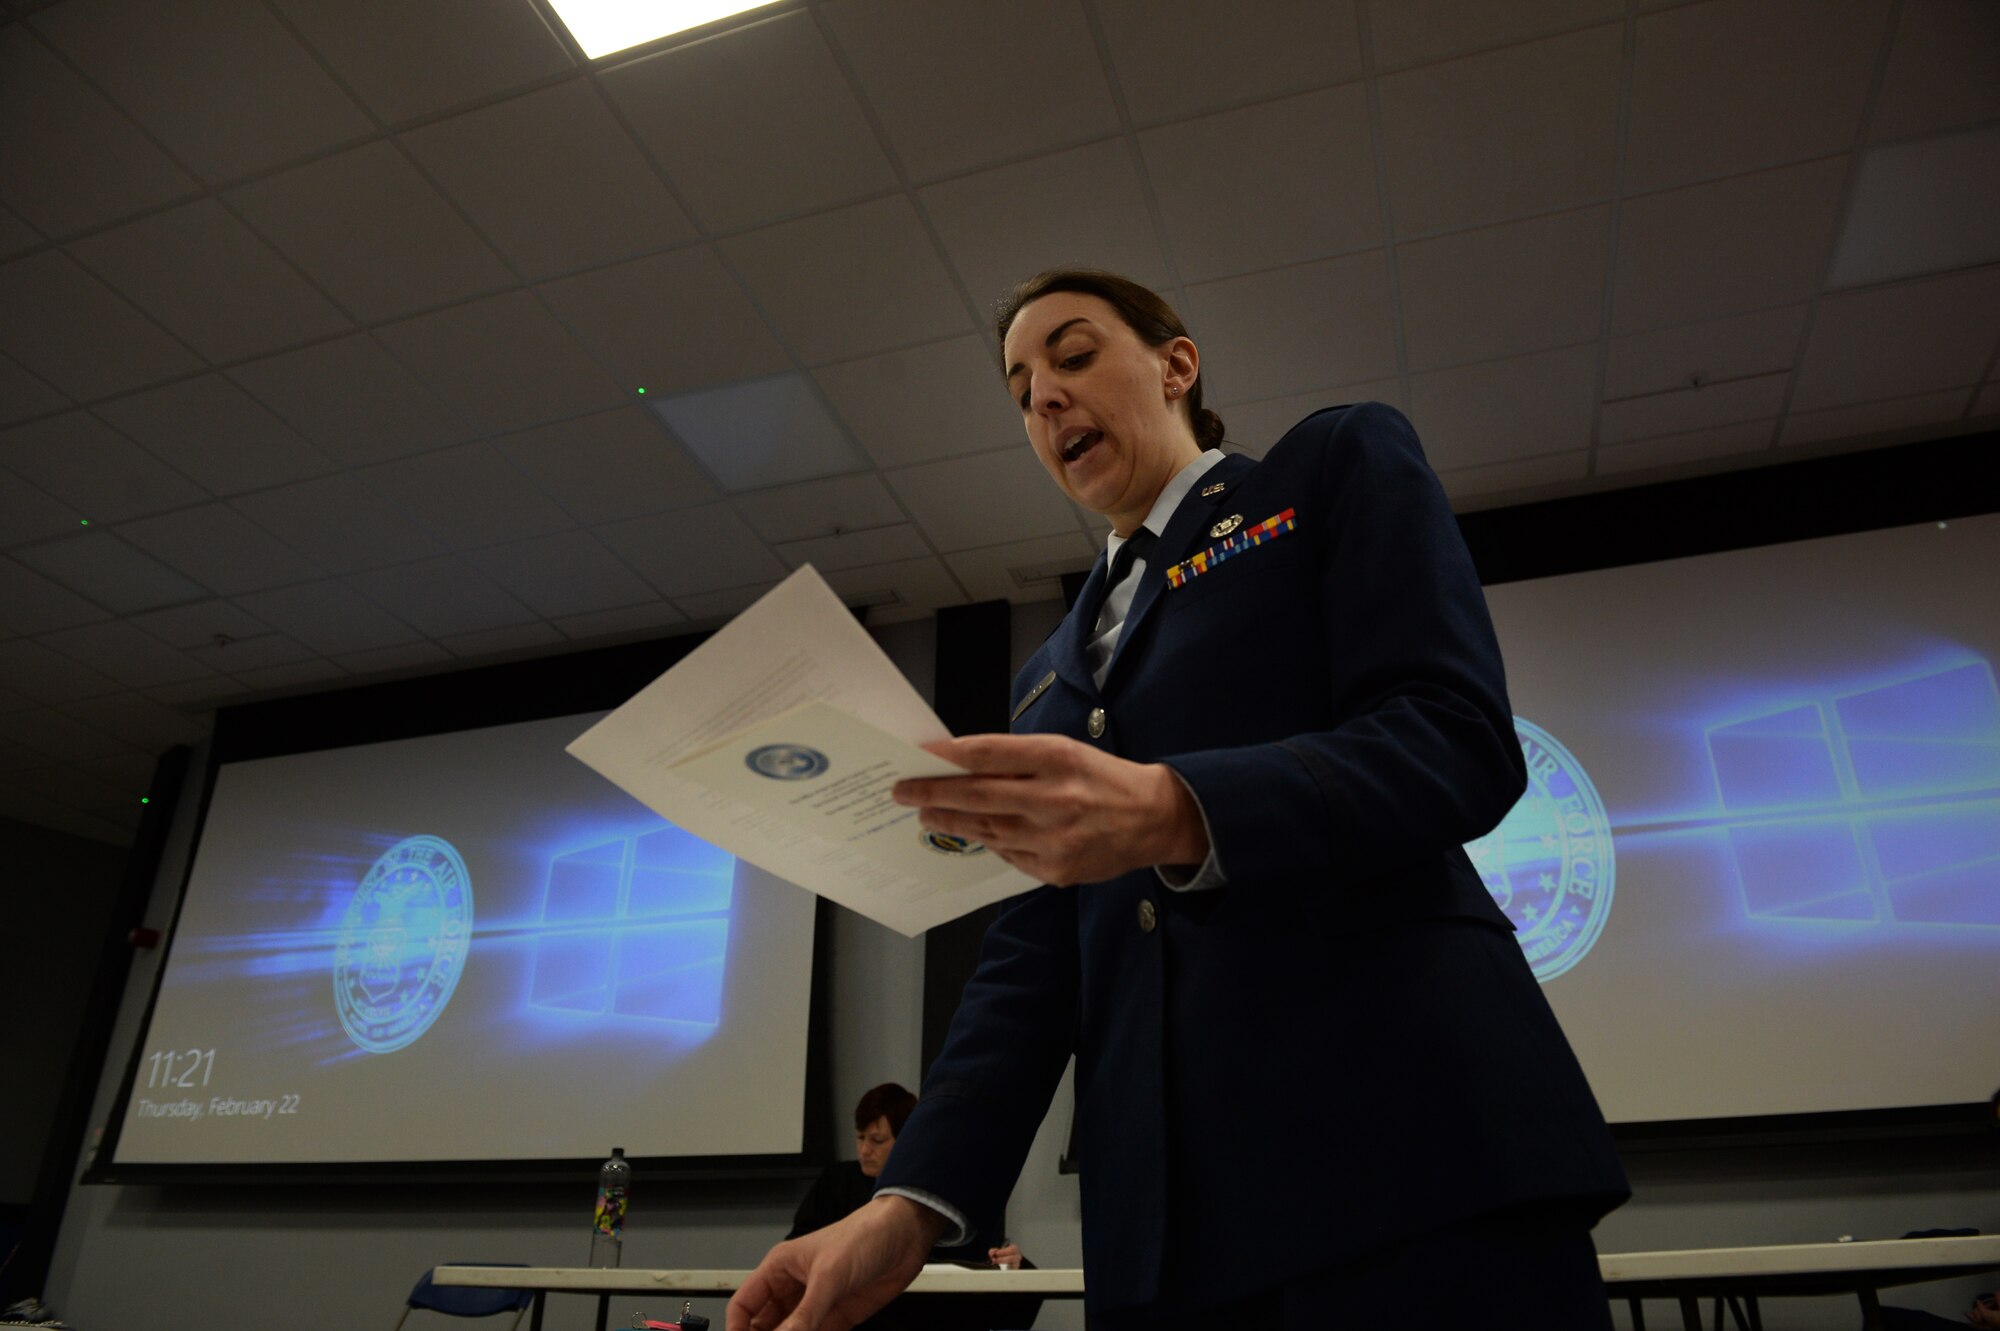 (courtesy photo) Maj. Julie A. Beyer, an area defense counsel assigned to the Air Force Legal Operations Agency, reads from her files during a mock trial at the Strike Eagle Complex at Royal Air Force Lakenheath, England, Feb. 22, 2018. During the skit, she argued her belief that the prosecutor had not met the burden of proof for sexual assault and therefore, her client was not guilty. (U.S. Air Force photo/Airman 1st Class Shanice Williams-Jones)